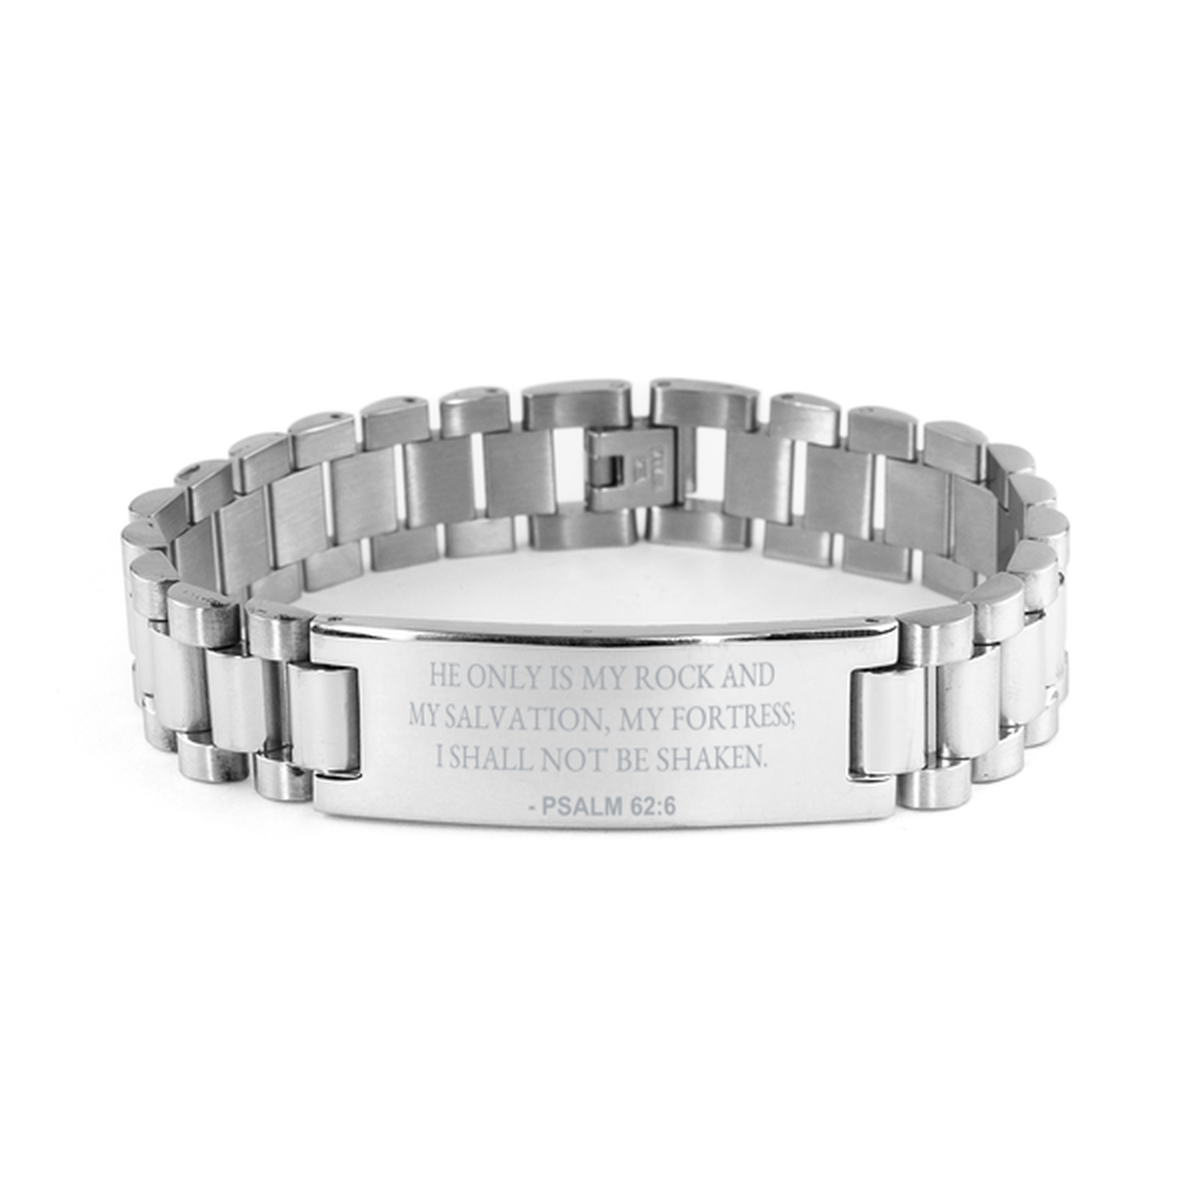 Christian Ladder Stainless Steel Bracelet, Psalm 62:6 He Only Is My Rock And My Salvation, My Fortress;, Motivational Bible Verse Gifts For Men Women